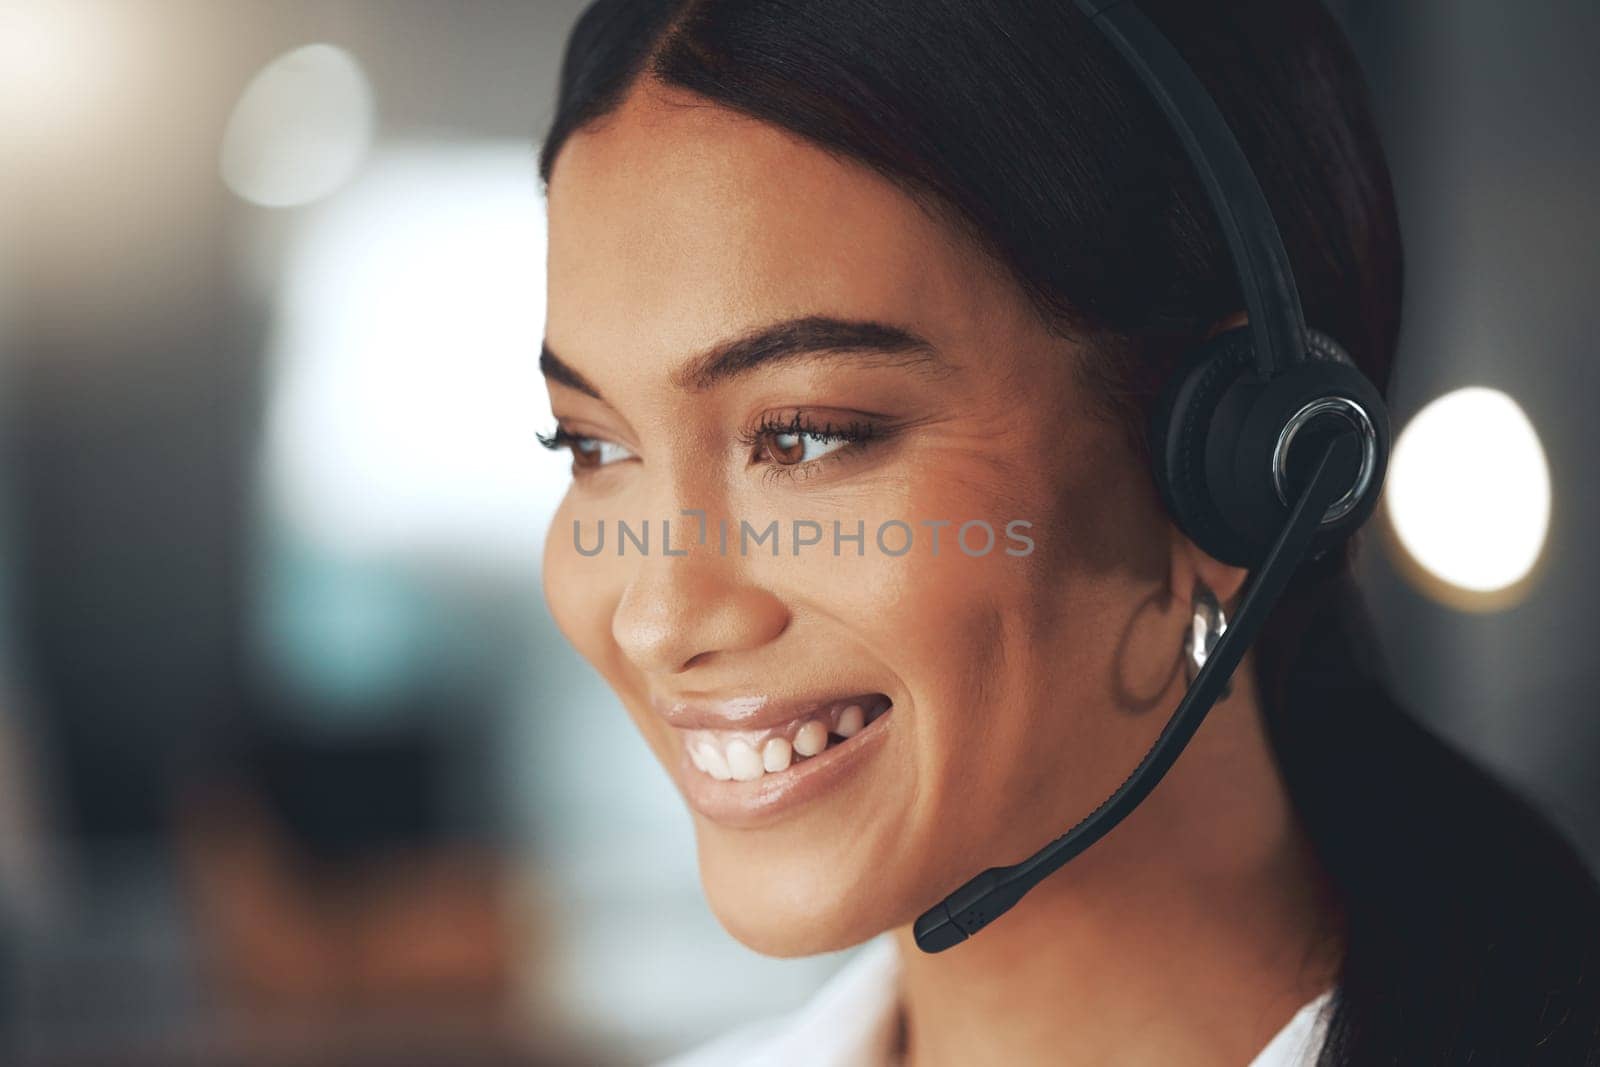 Call center, smile and thinking with woman consultant in telemarketing office for help or sales. Contact, face and headset with happy agent in workplace for consulting, customer service or support.